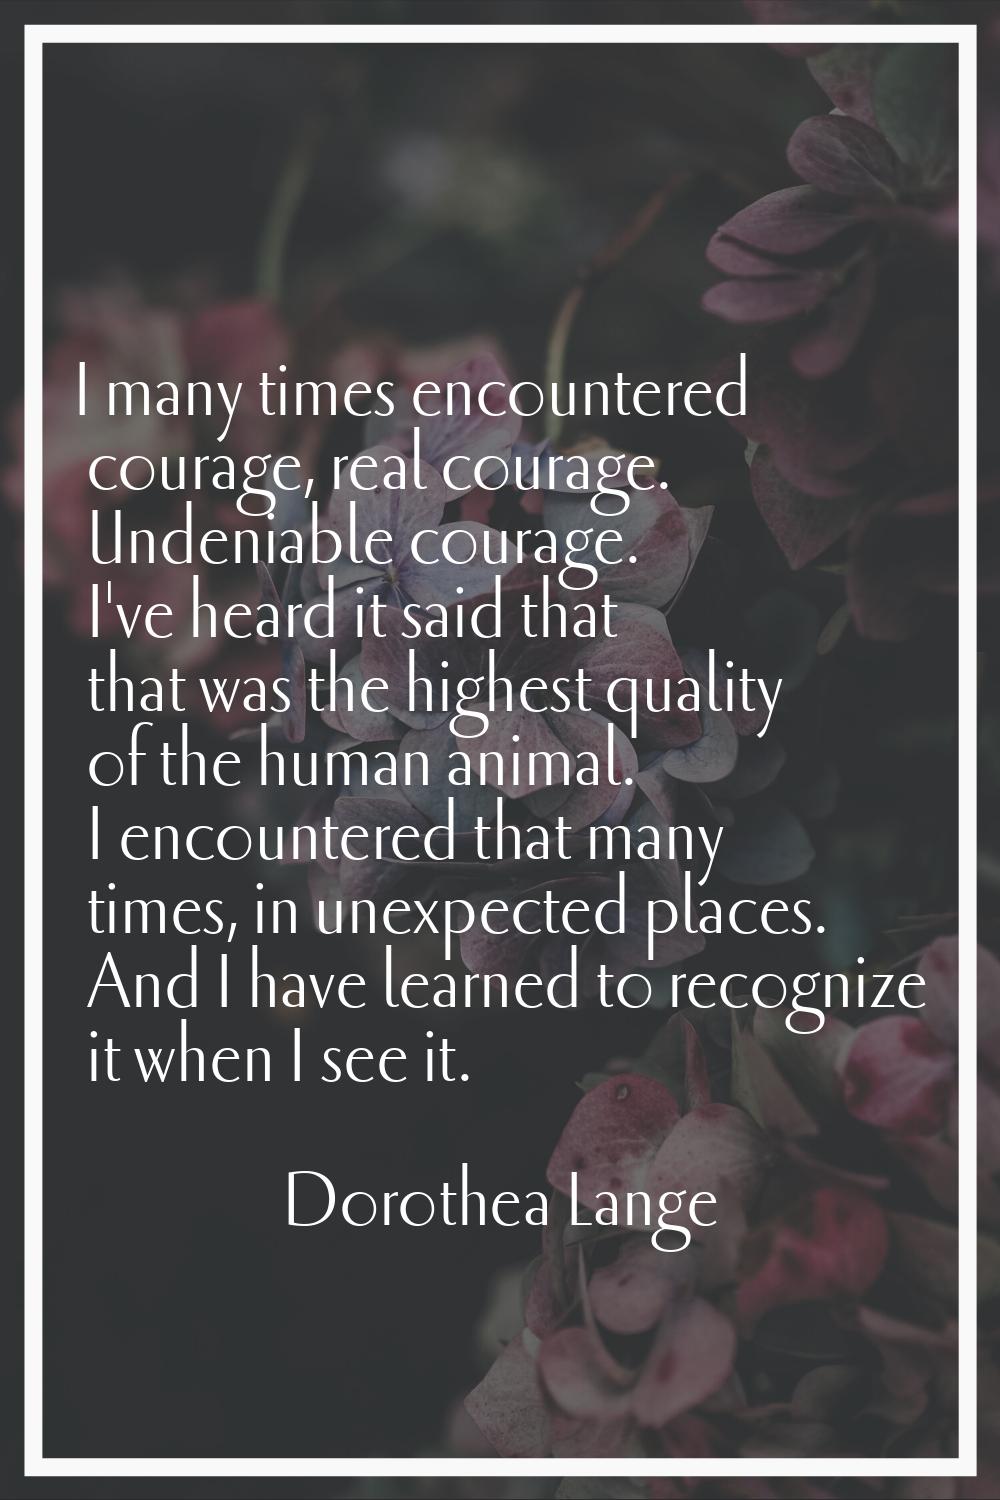 I many times encountered courage, real courage. Undeniable courage. I've heard it said that that wa